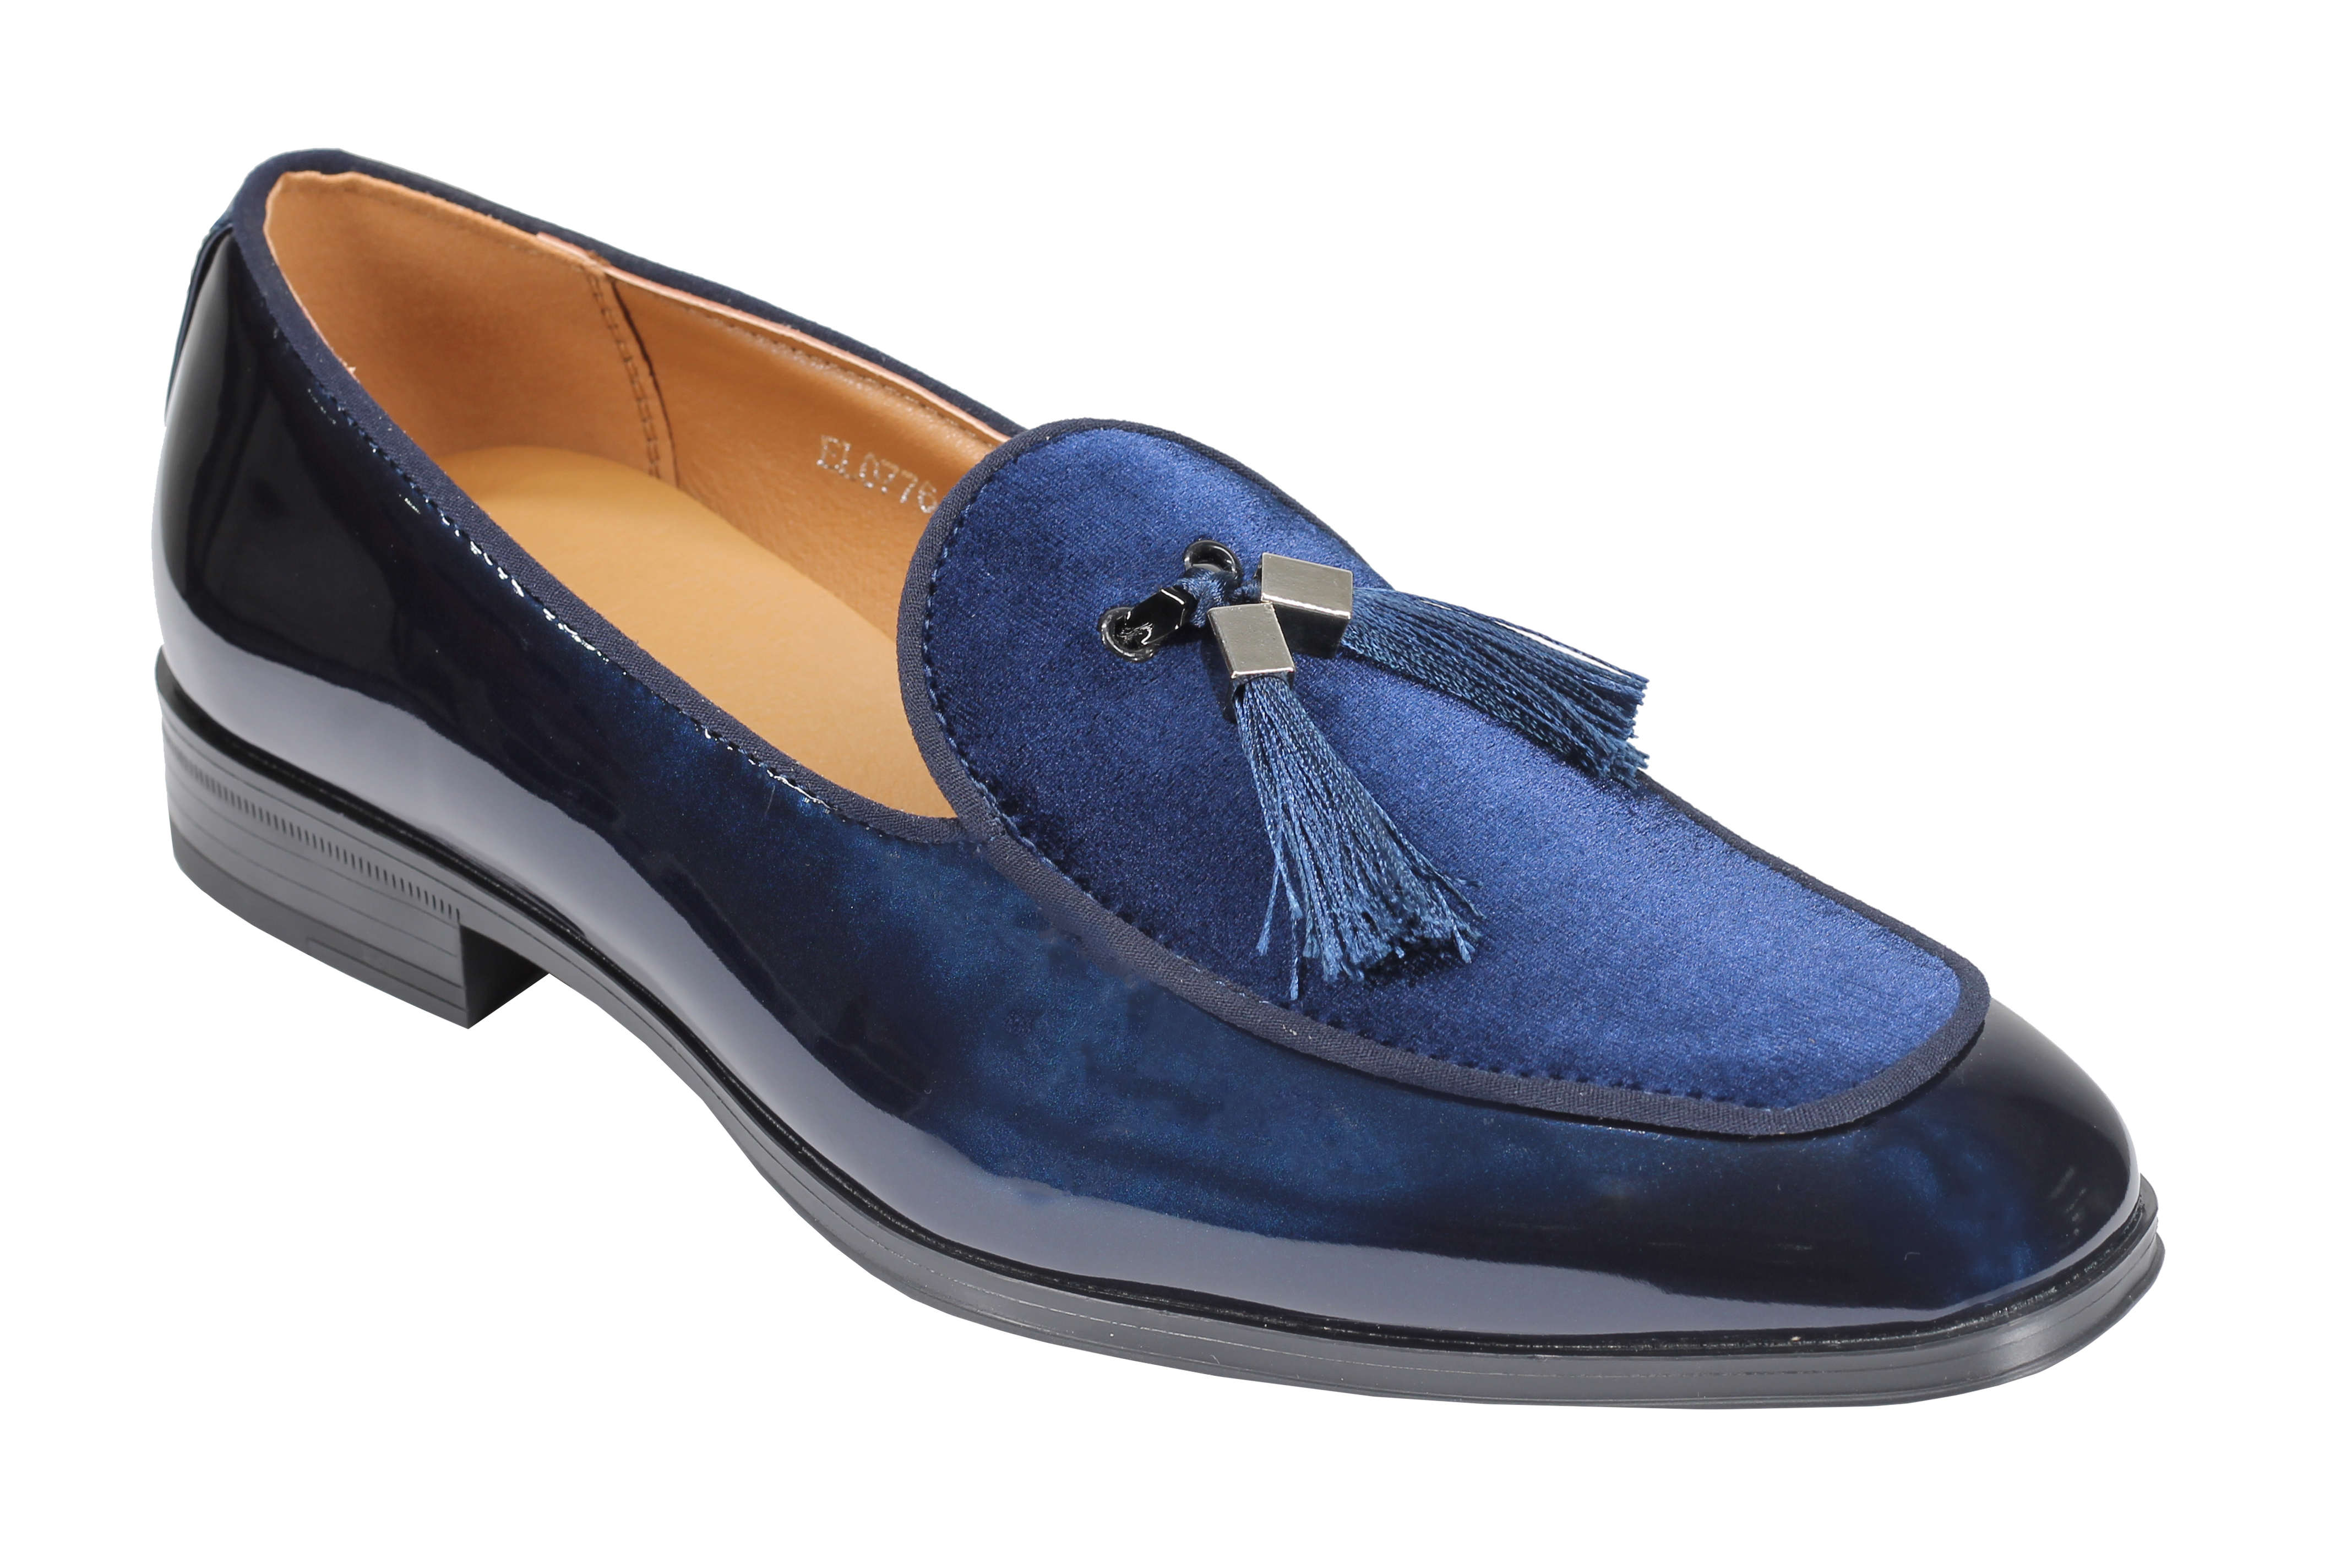 NAVY SHINY FAUX LEATHER TASSEL LOAFERS